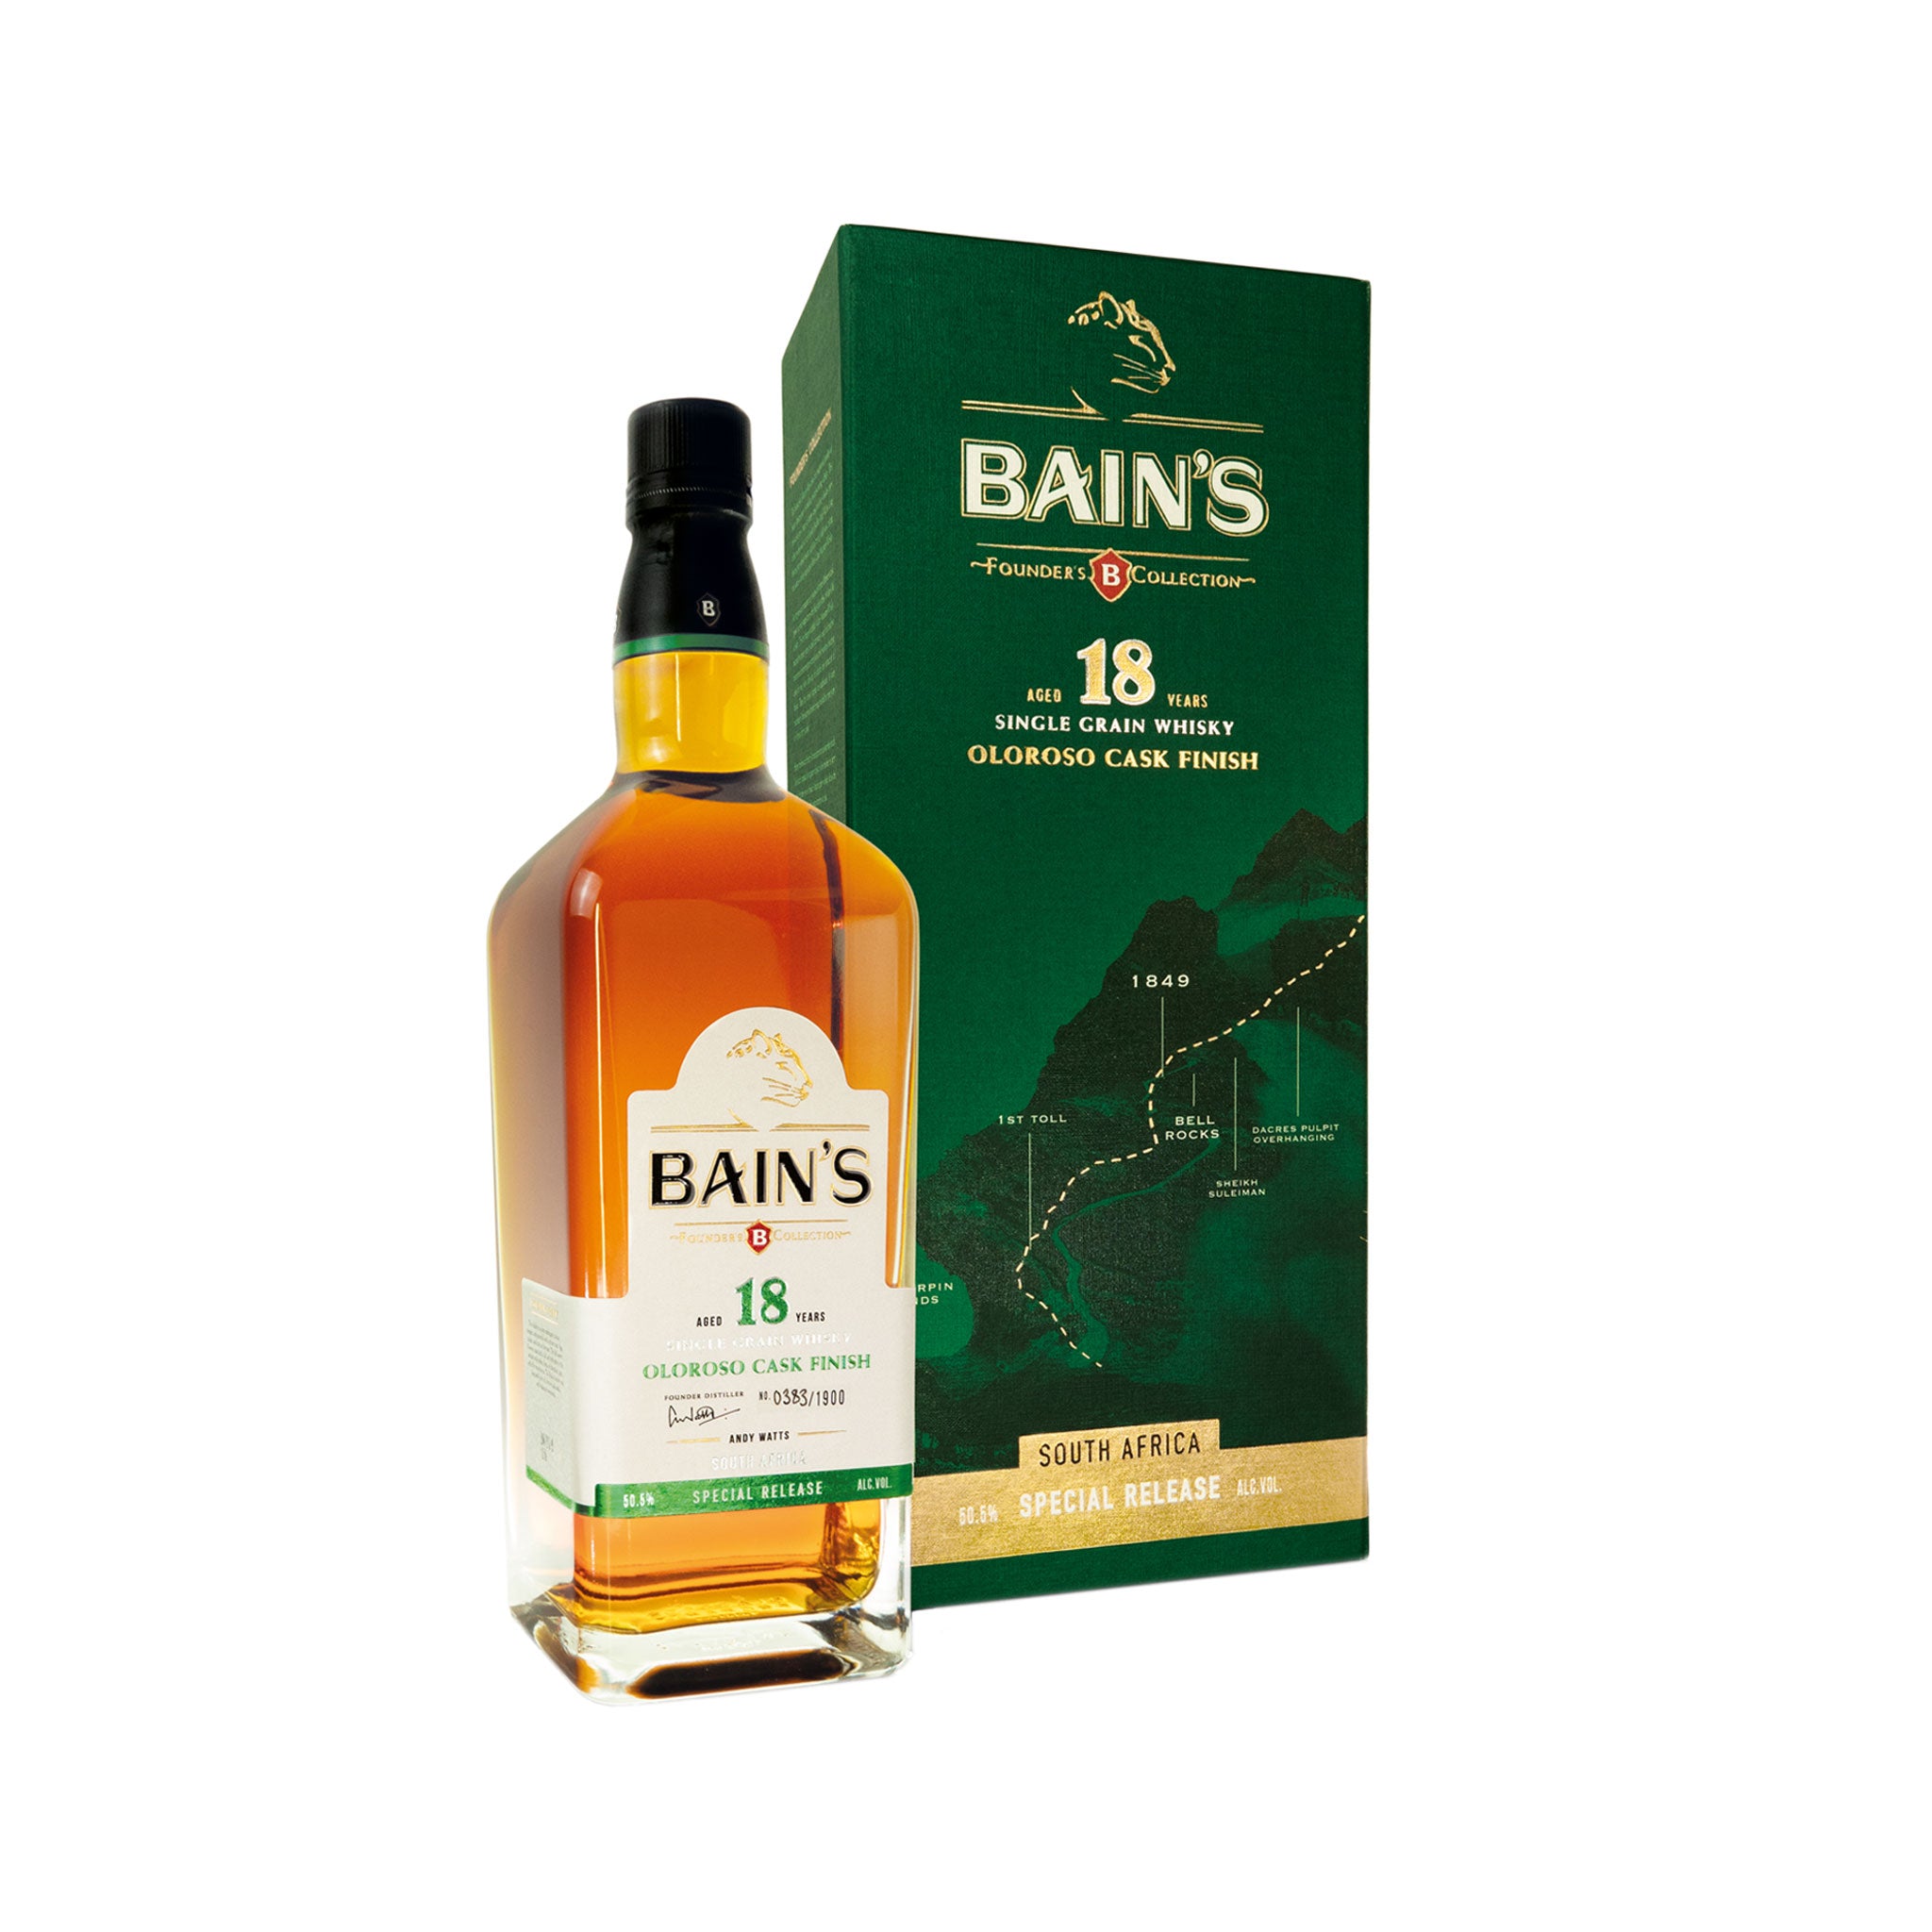 Bain's Founders Collection Whisky 18 Year Old Oloroso Cask Finish